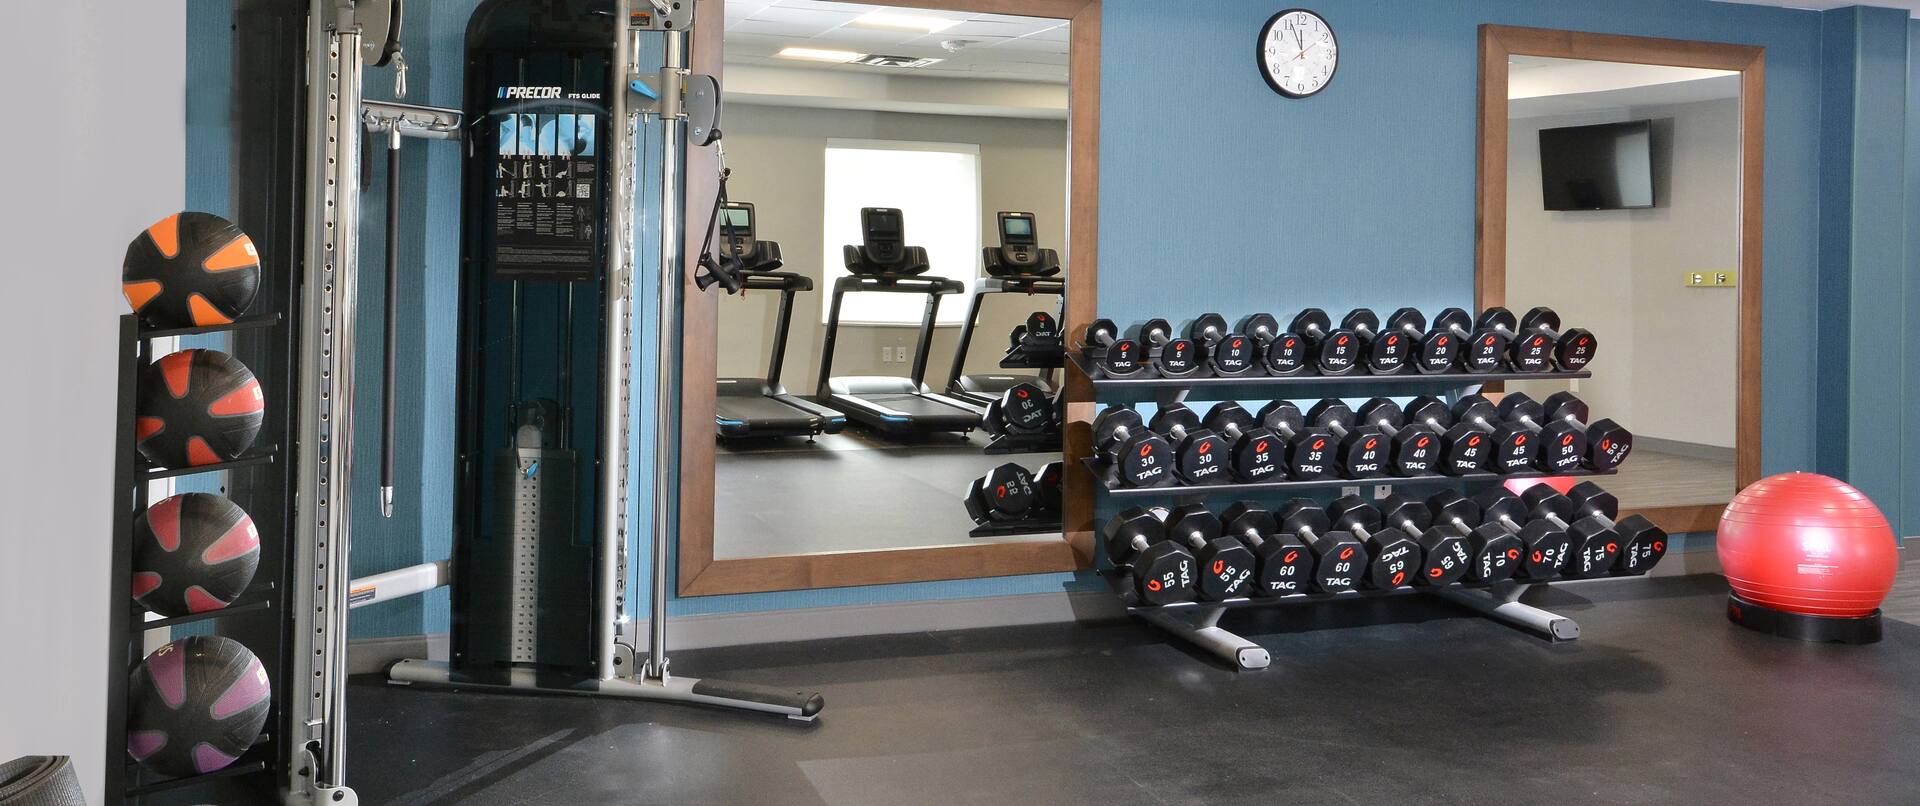 Fitness Center with Weights and Exercise Balls